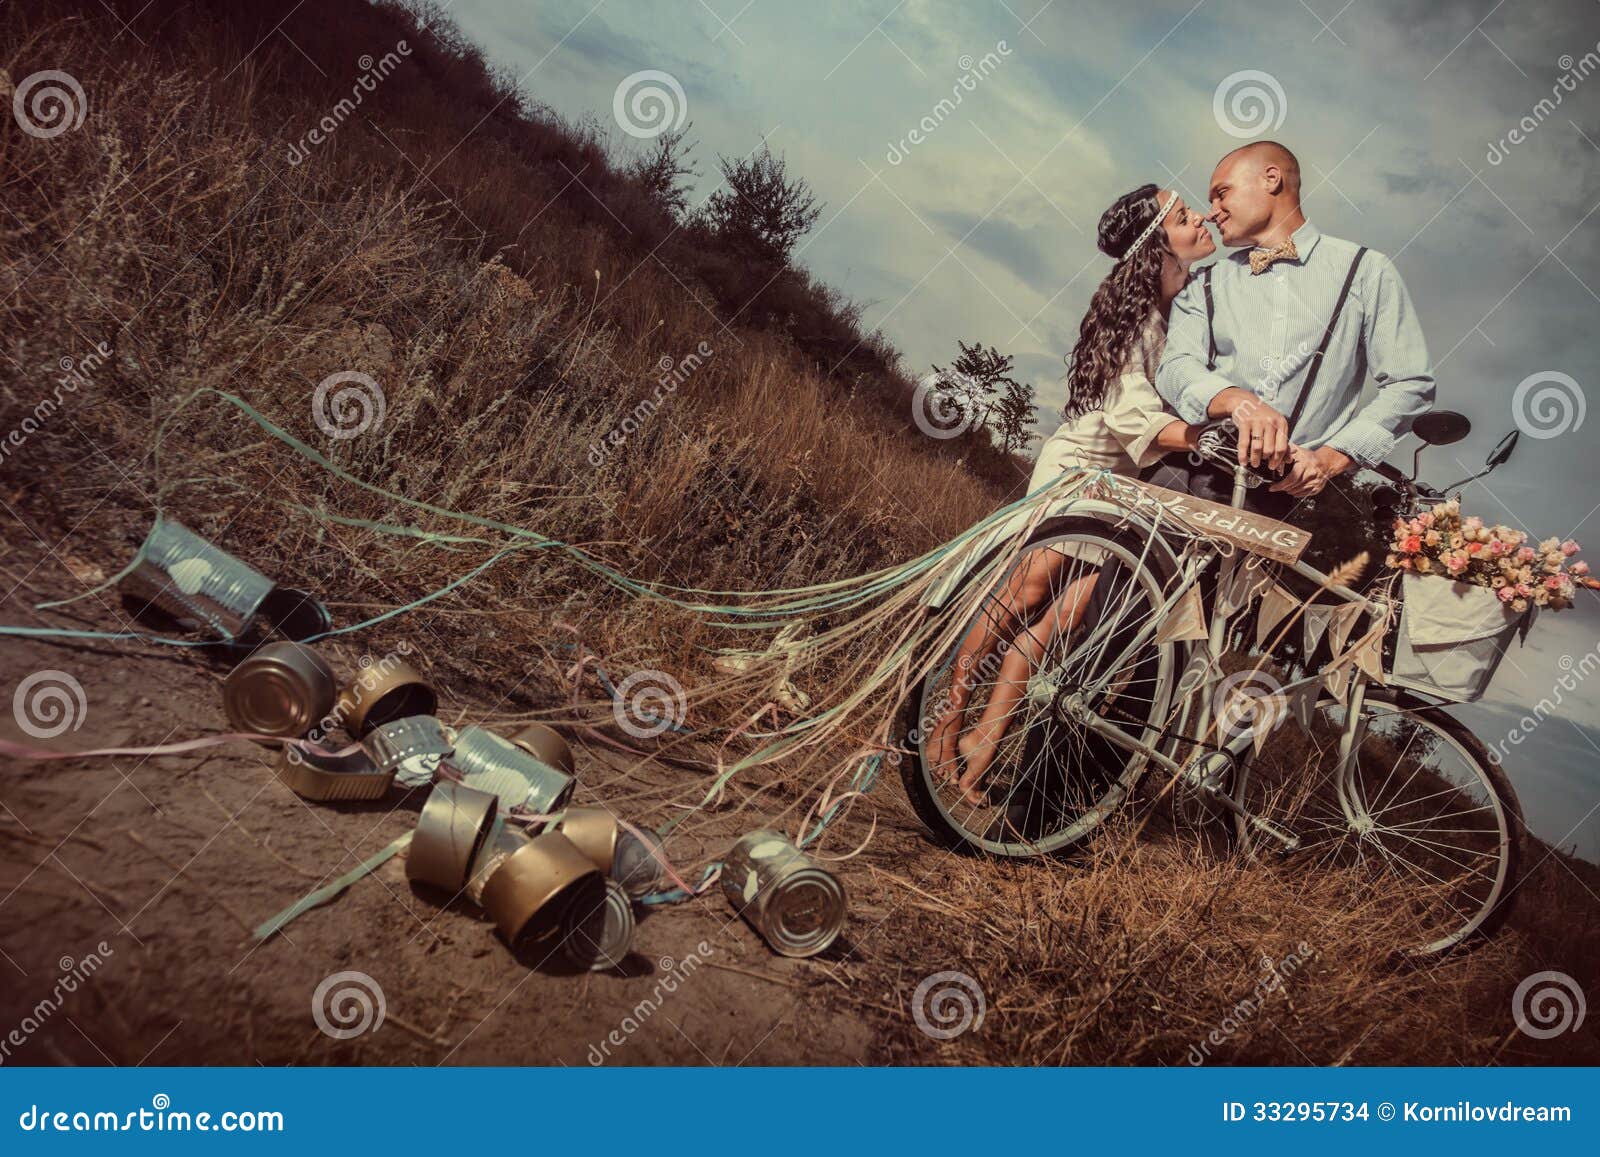 https://thumbs.dreamstime.com/z/vintage-wedding-groom-bride-bicycle-just-married-sign-cans-attached-33295734.jpg?ct=jpeg